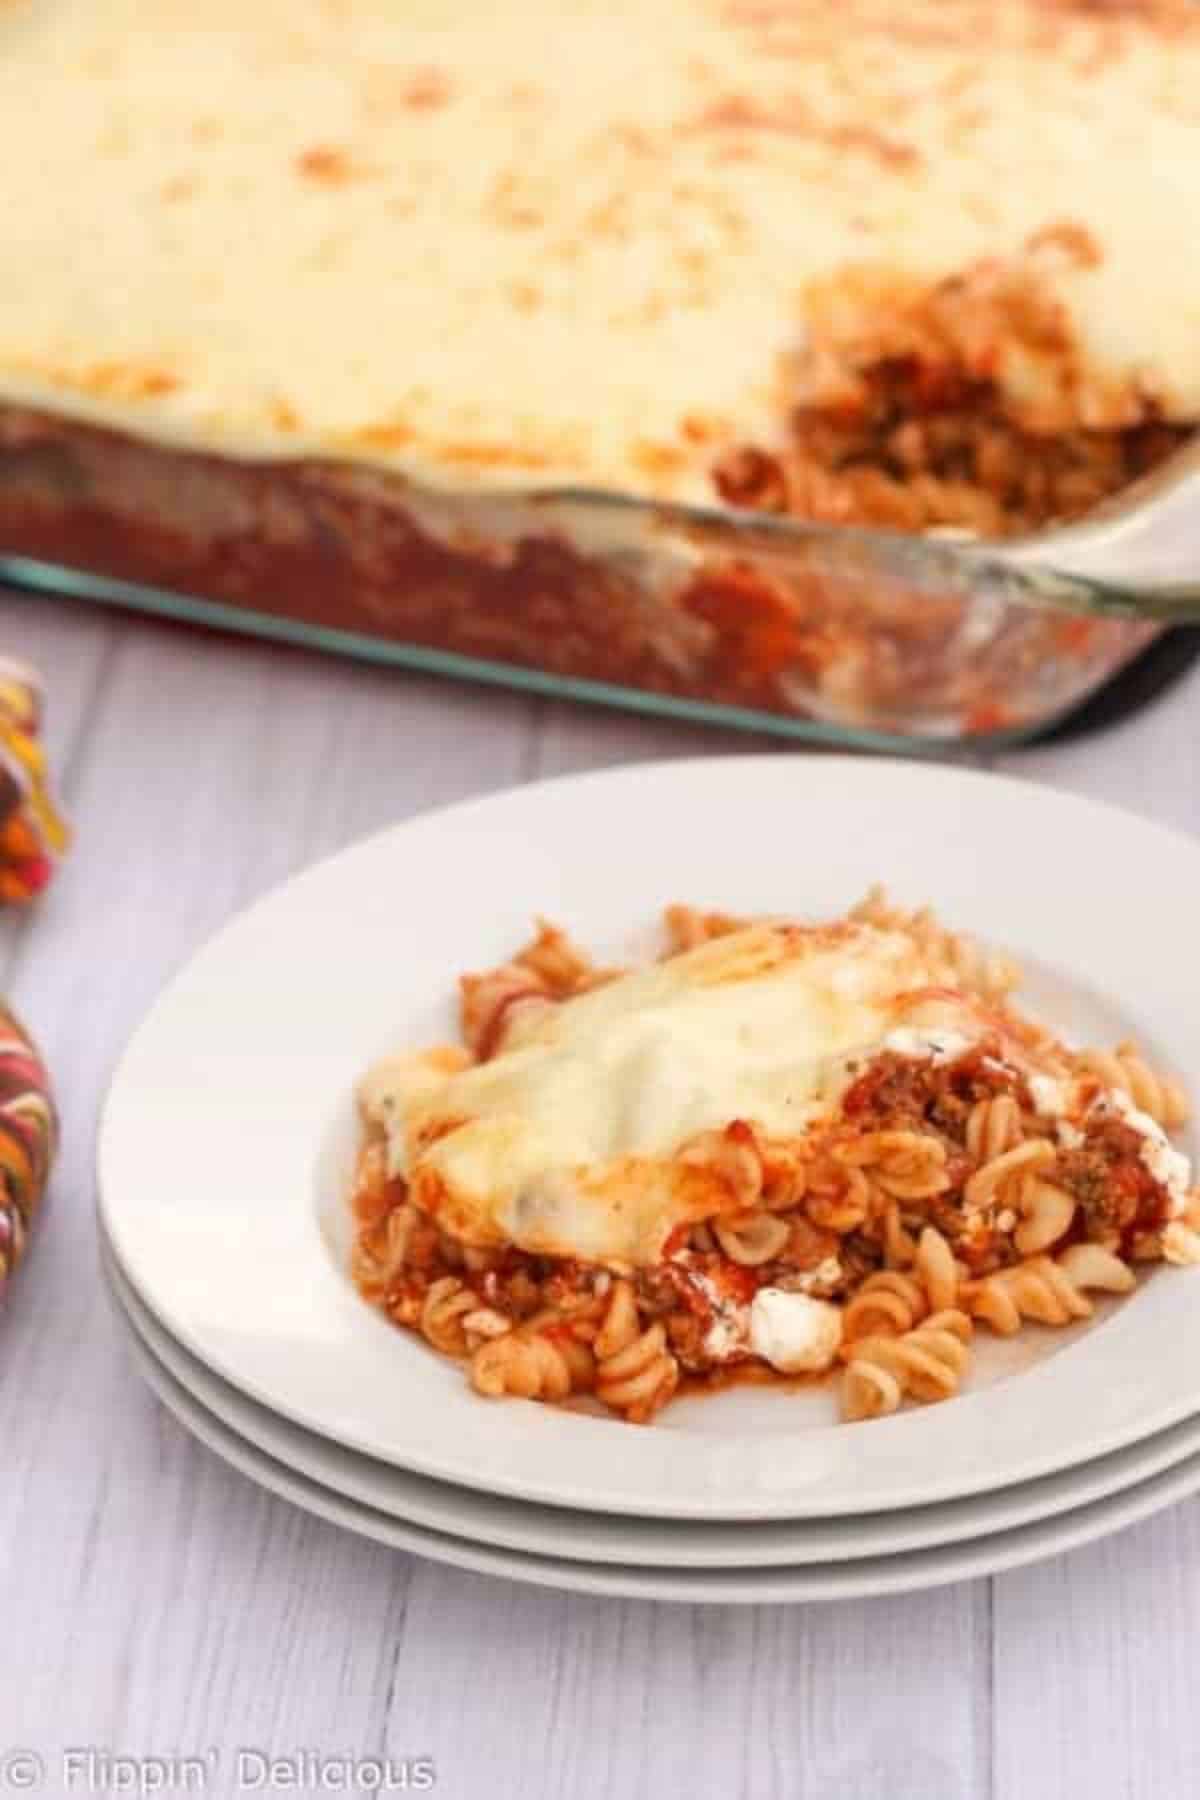 A piece of delicious Easy Gluten-Free Lasagna on a white plate.